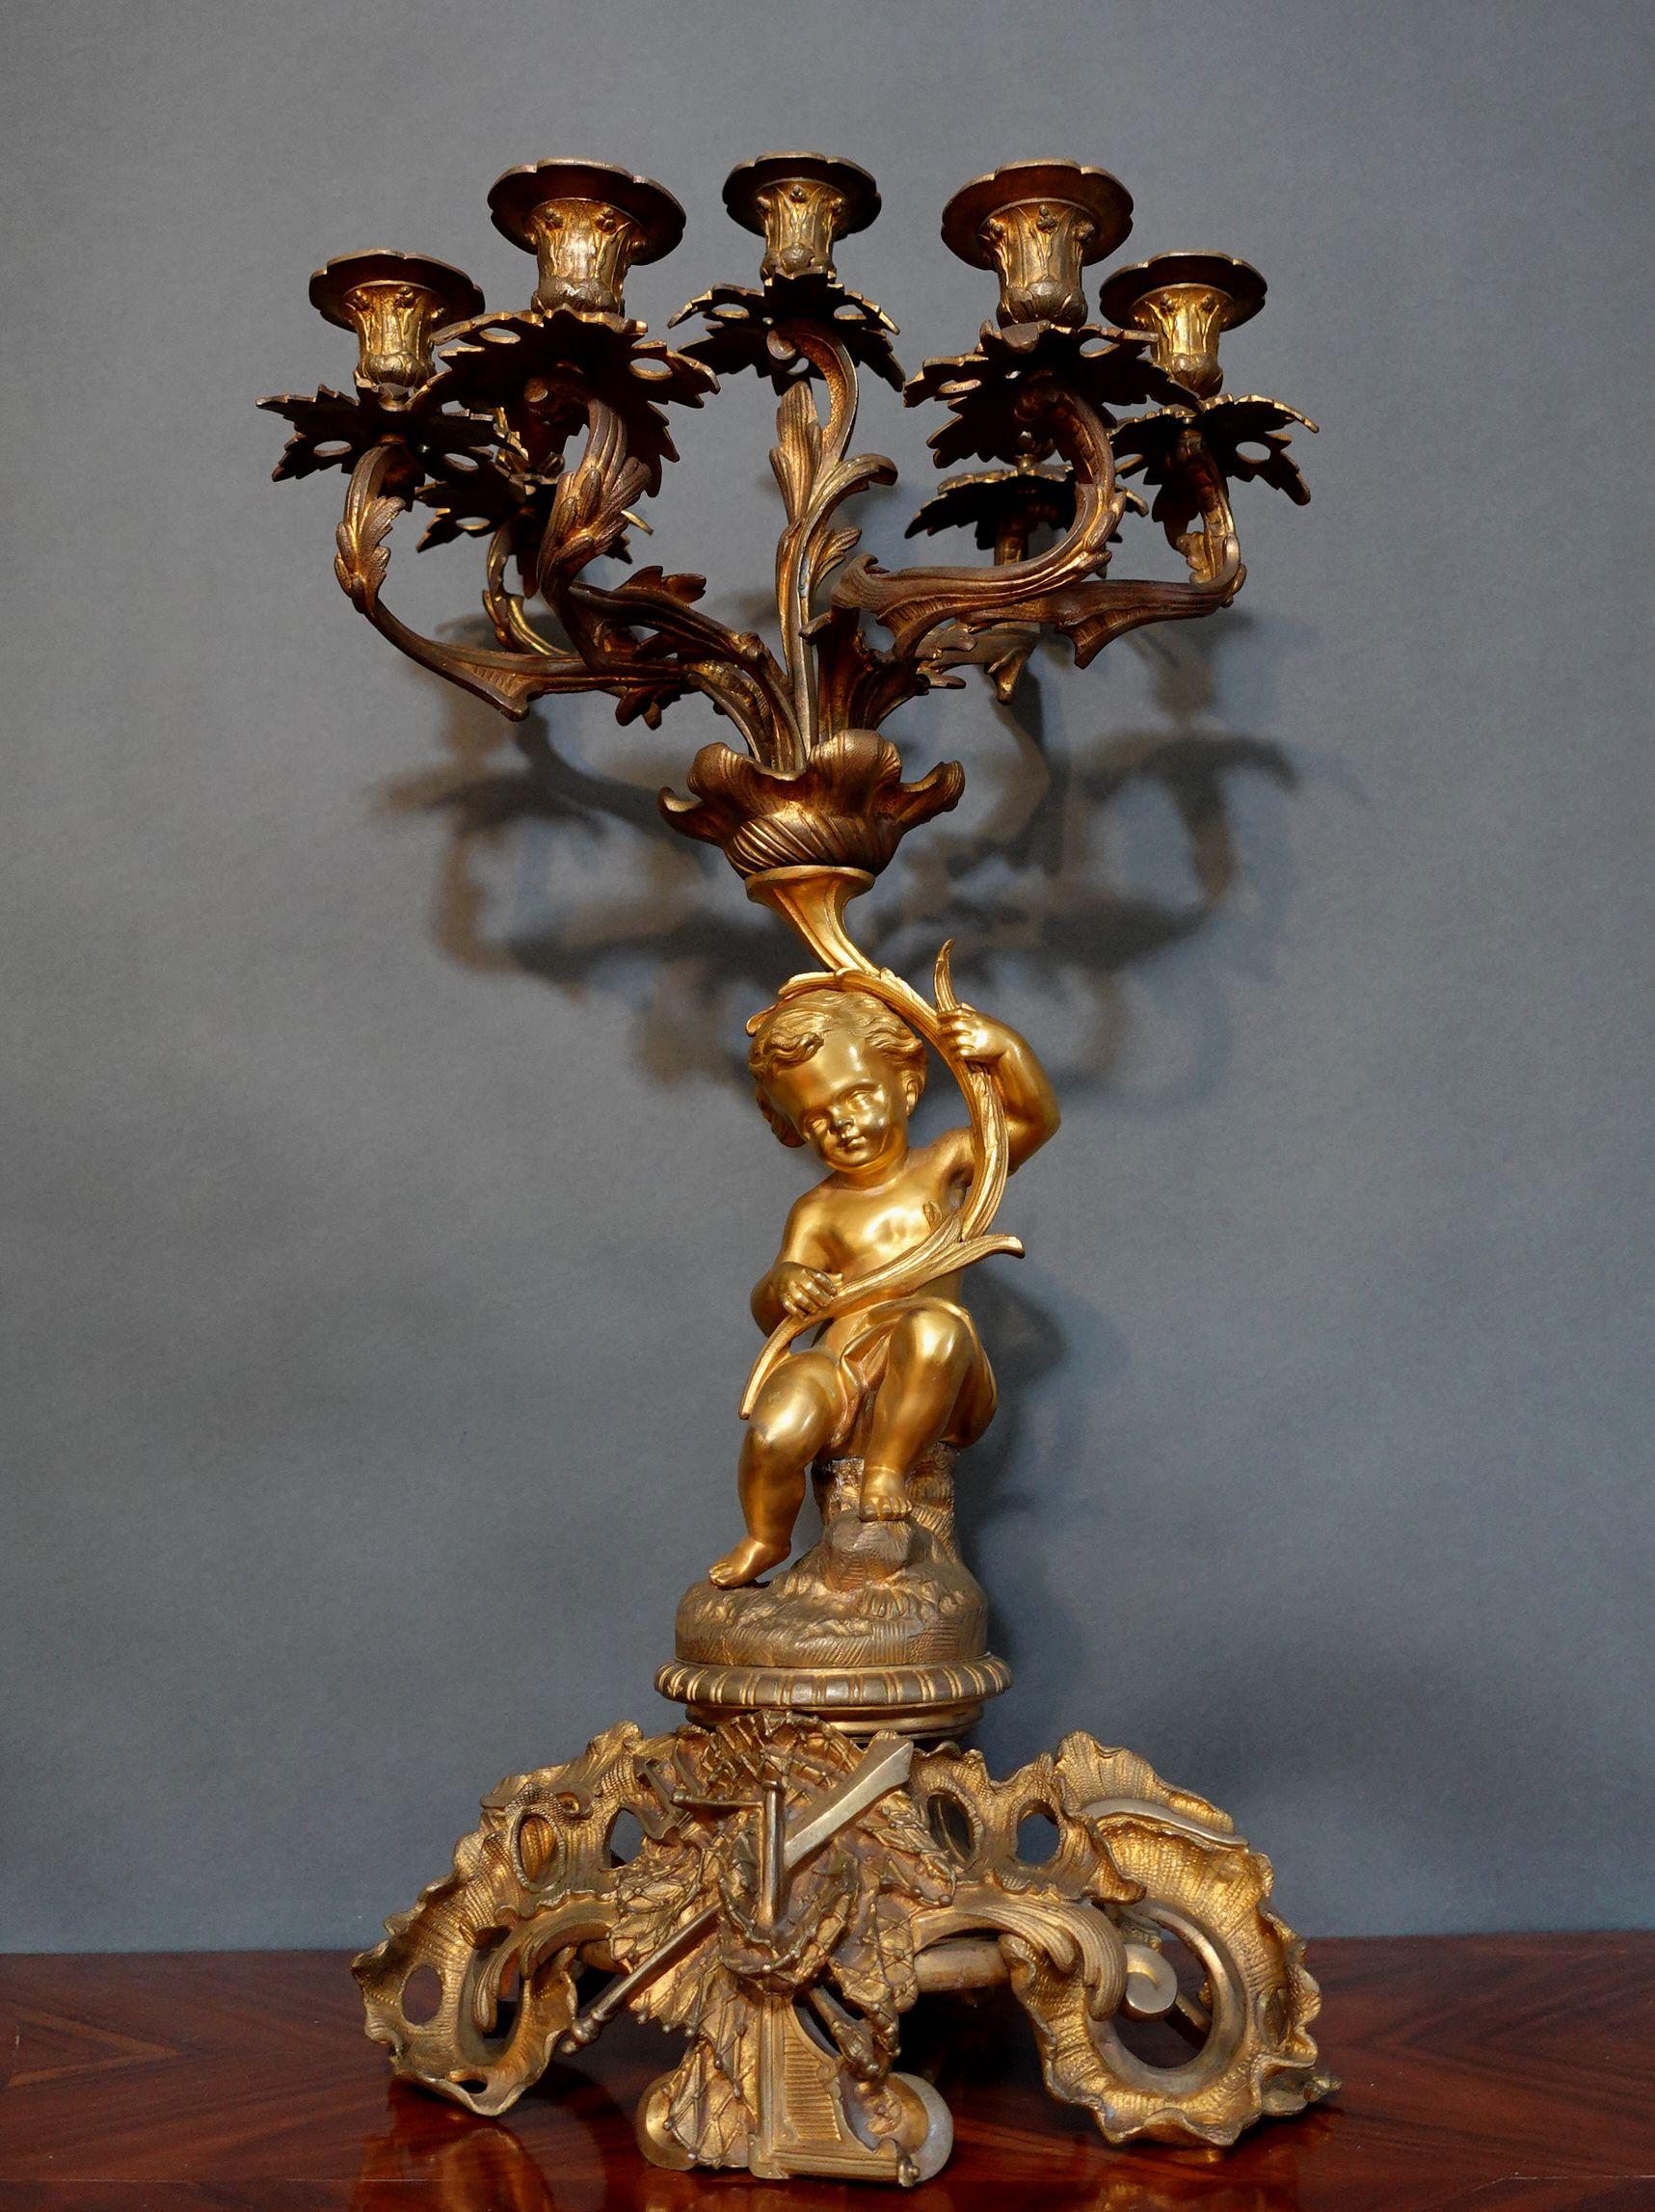 Cast Large 19th Century French Louis XV Bronze Candelabras with seating Putti For Sale